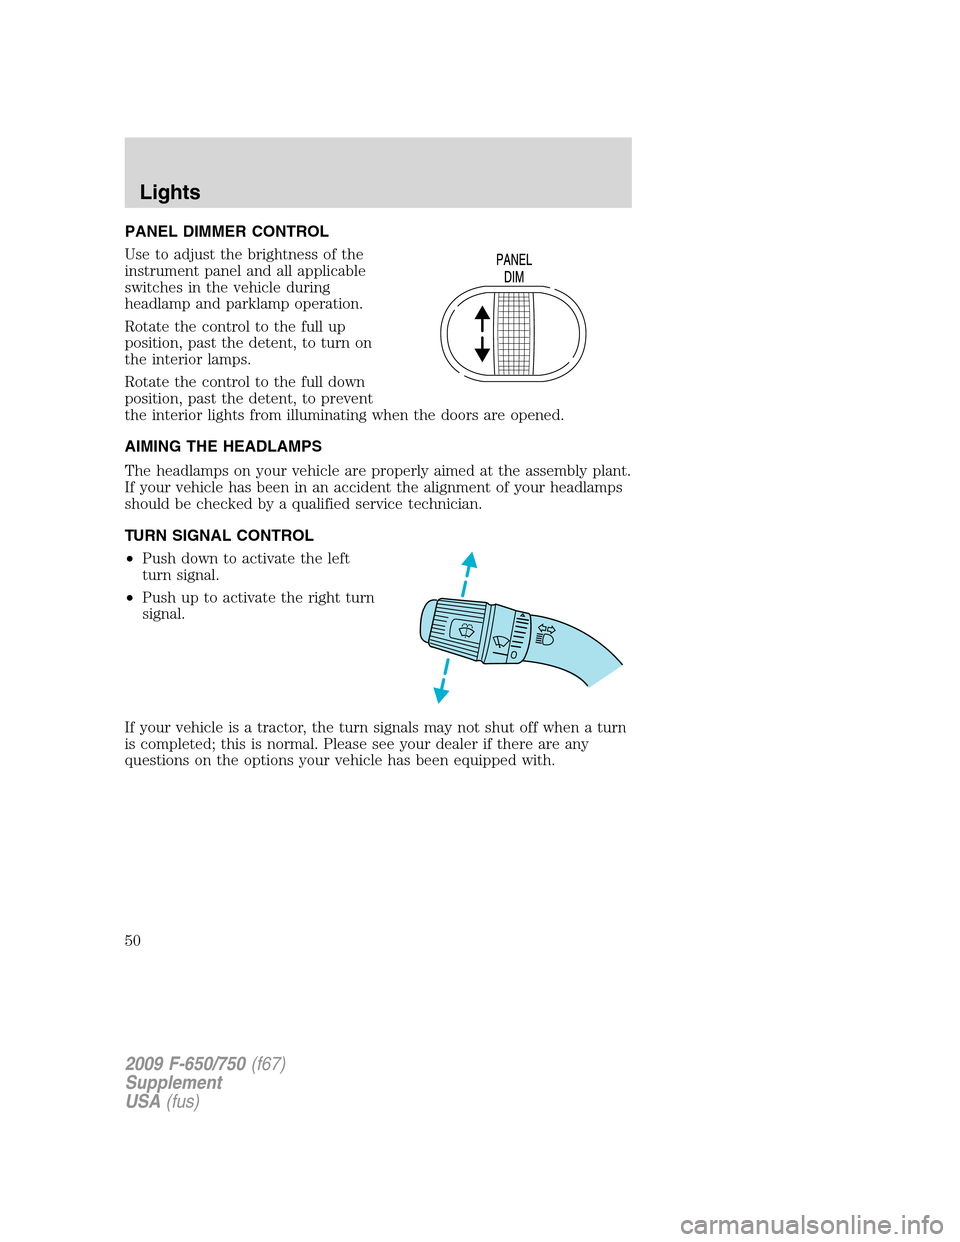 FORD F650 2009 12.G Owners Manual PANEL DIMMER CONTROL
Use to adjust the brightness of the
instrument panel and all applicable
switches in the vehicle during
headlamp and parklamp operation.
Rotate the control to the full up
position,